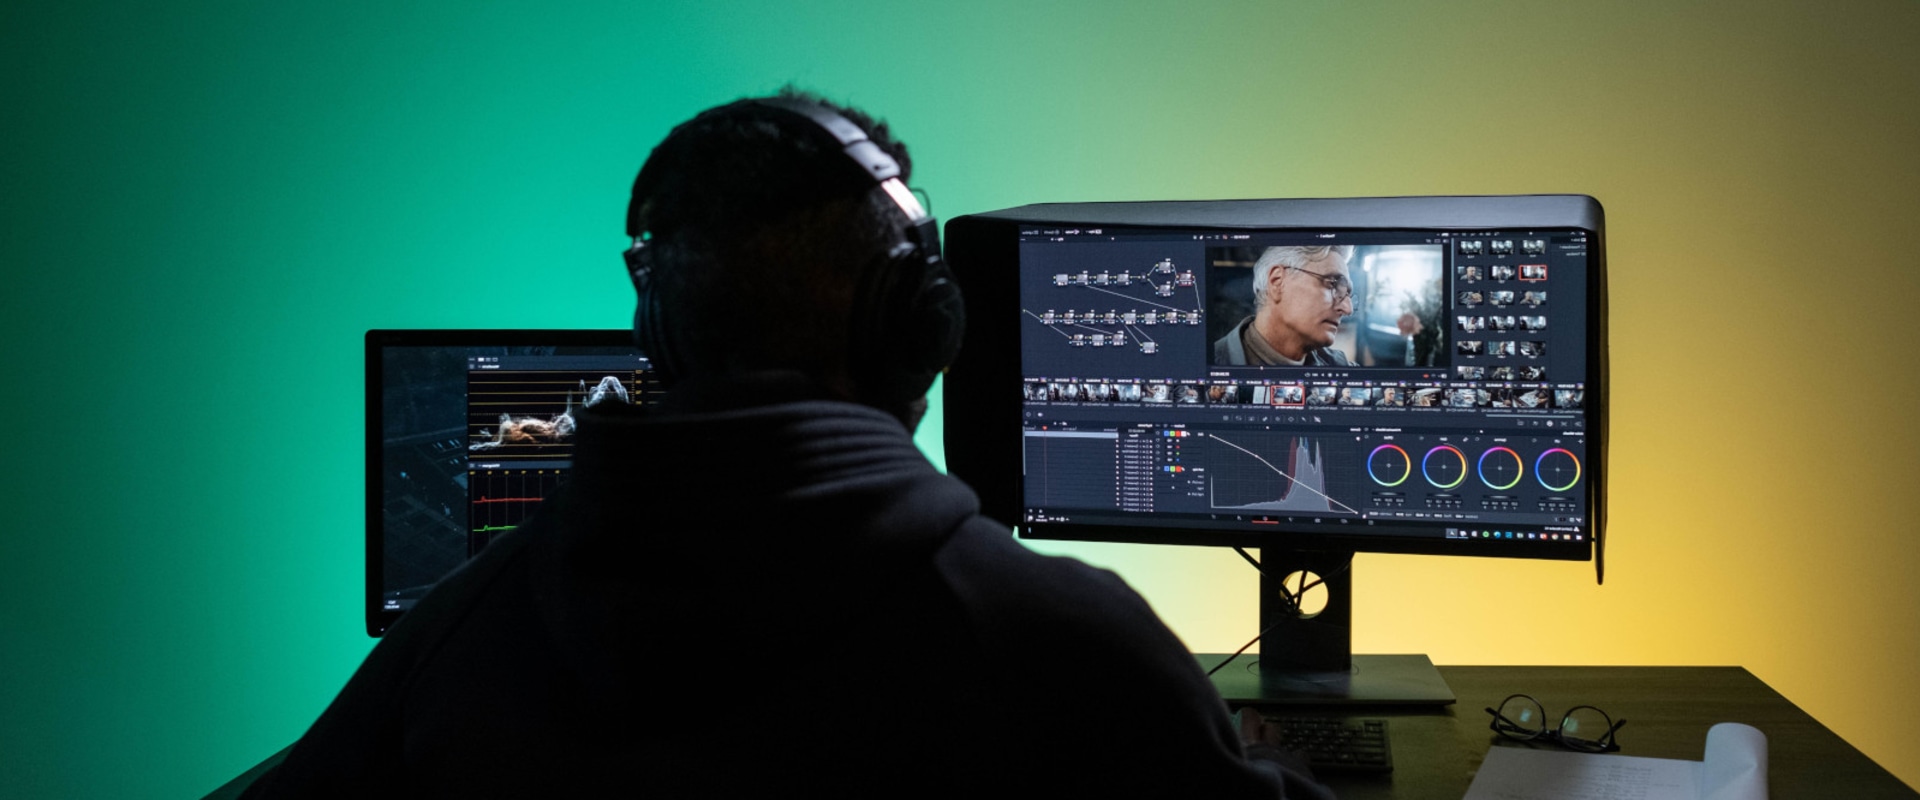 Comparing Types of Movie Making Software